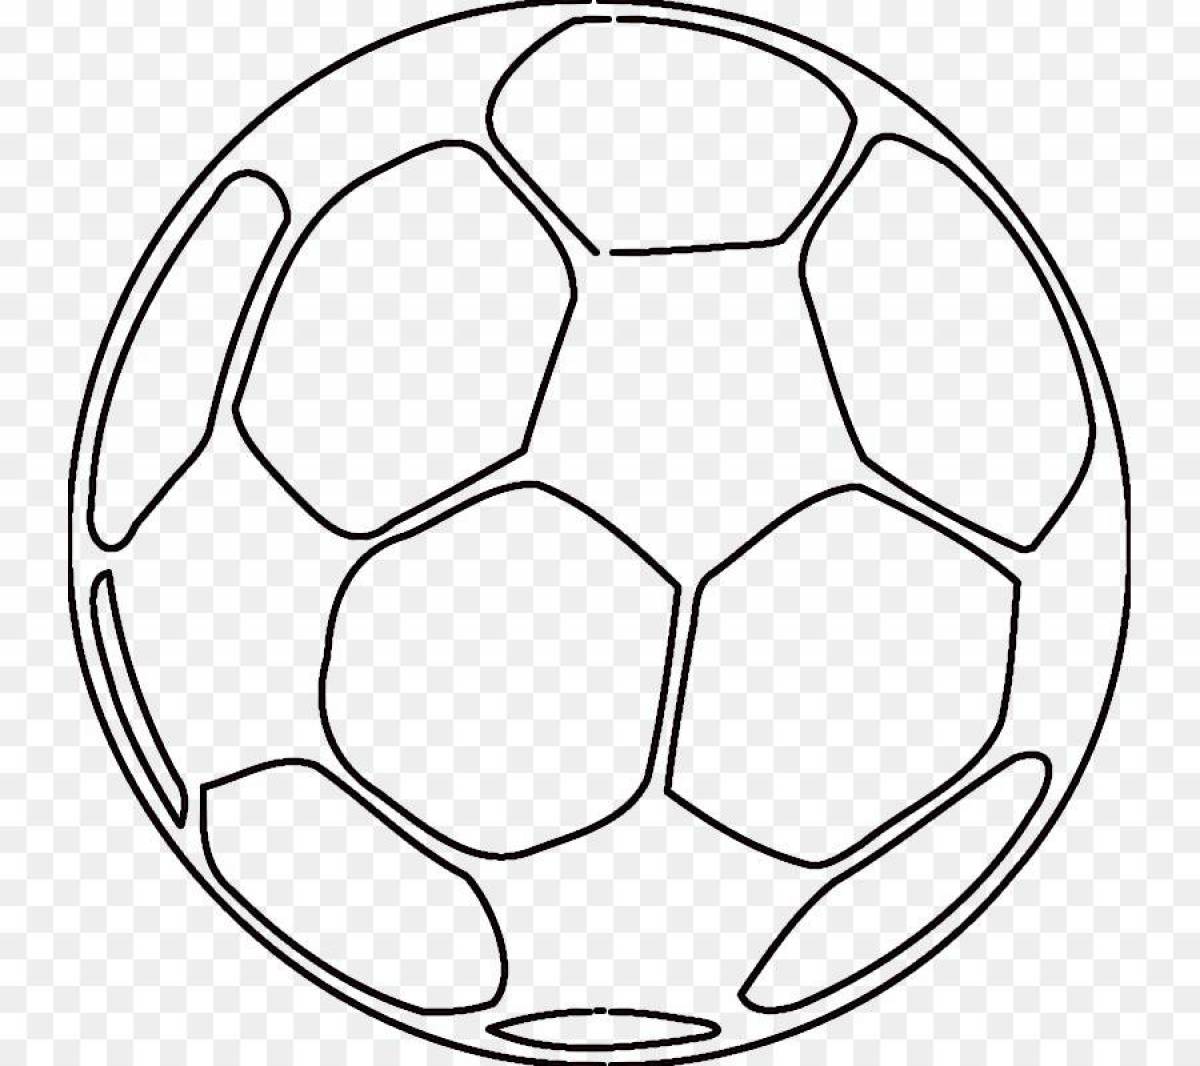 Gorgeous soccer ball coloring page